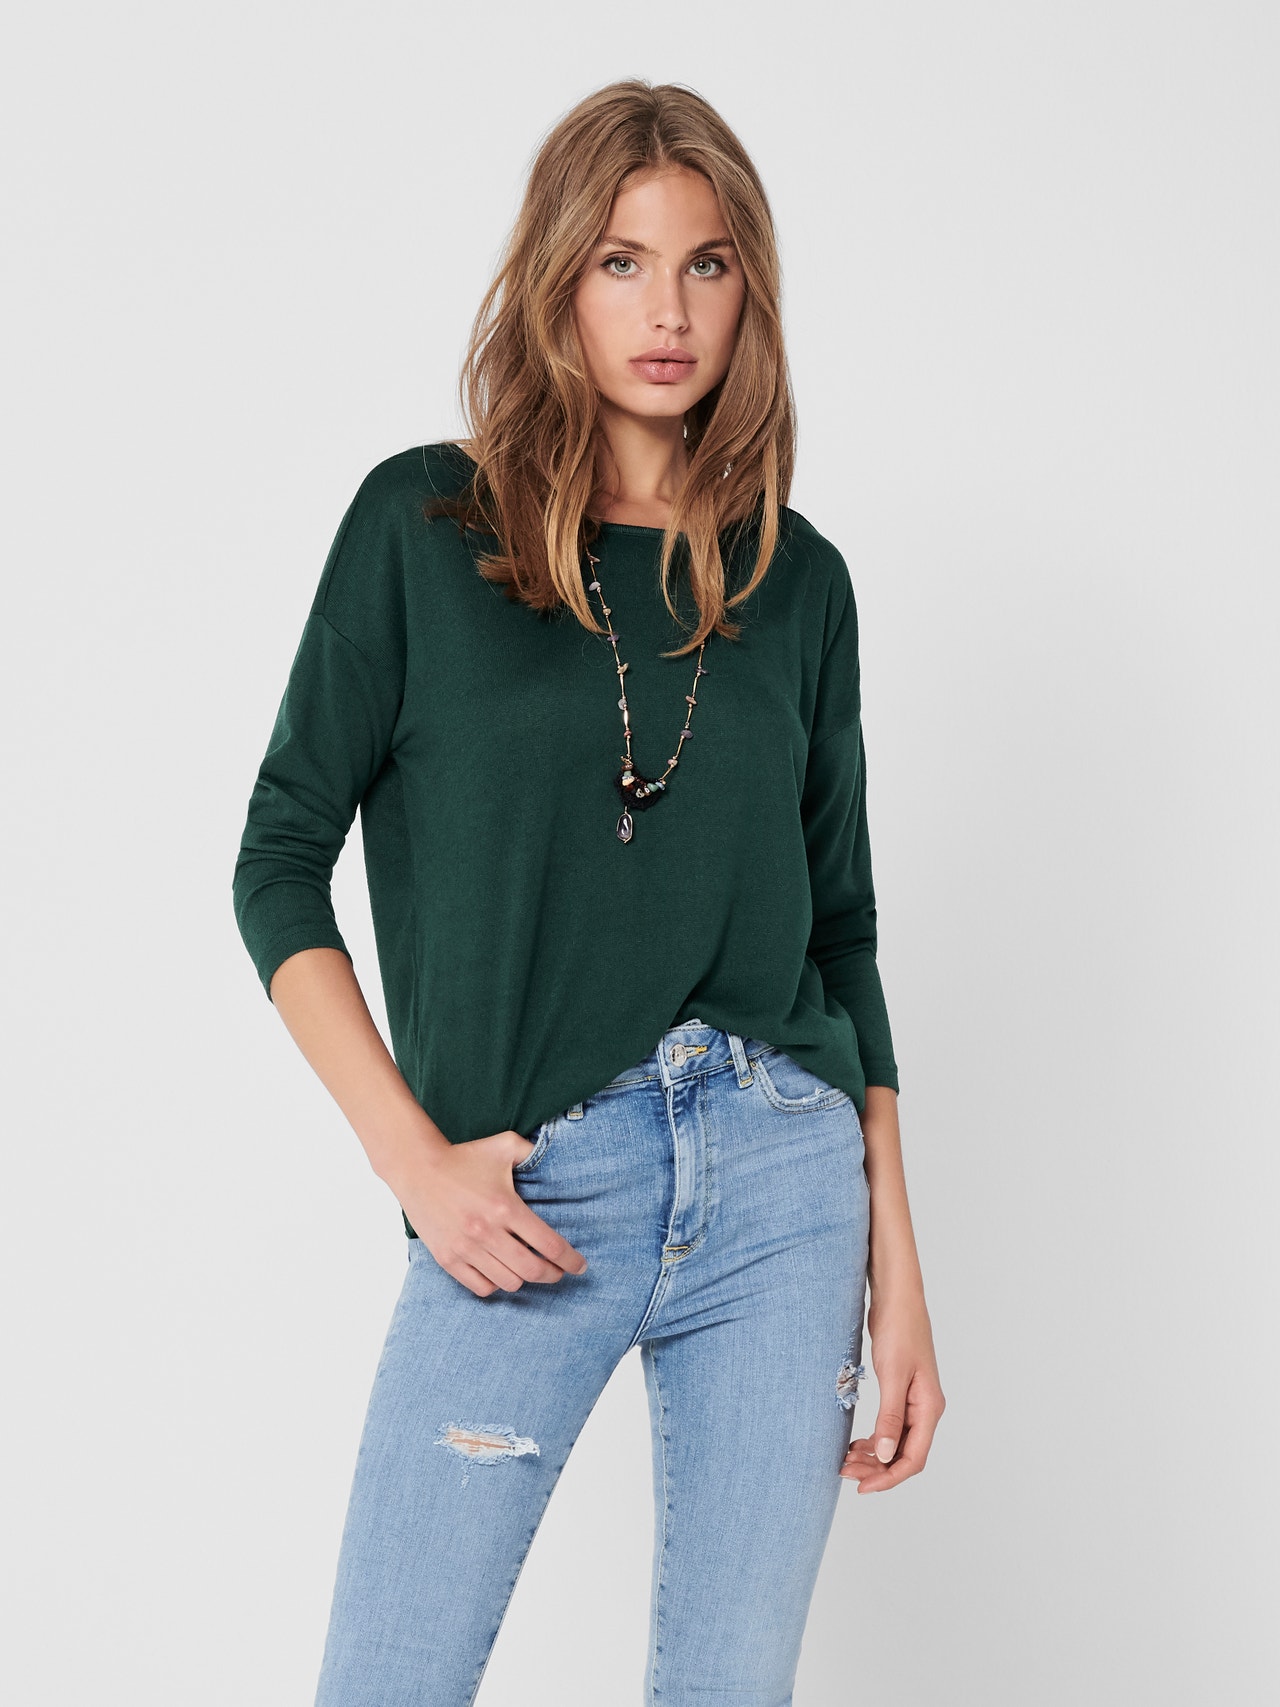 ONLY Loose Fit Round Neck Dropped shoulders Top -Green Gables - 15124402